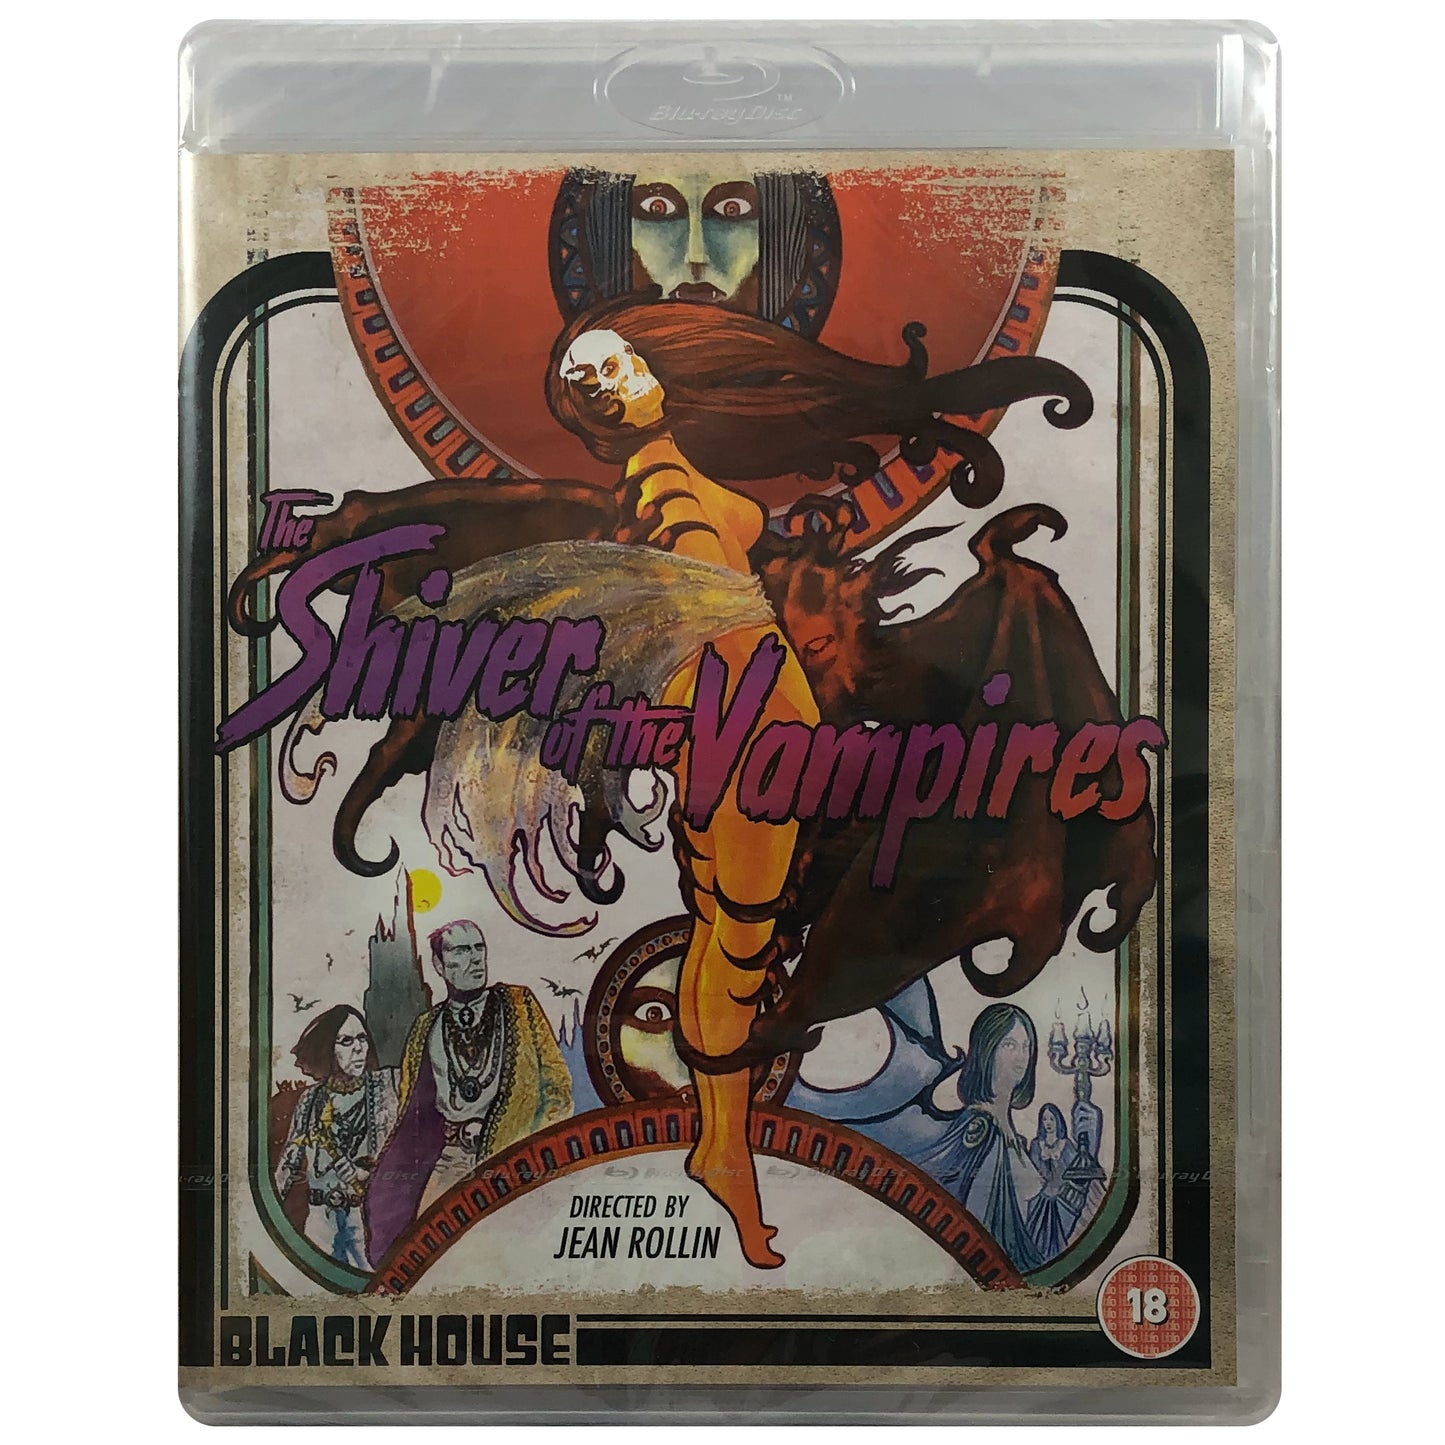 The Shiver of the Vampires Blu-Ray